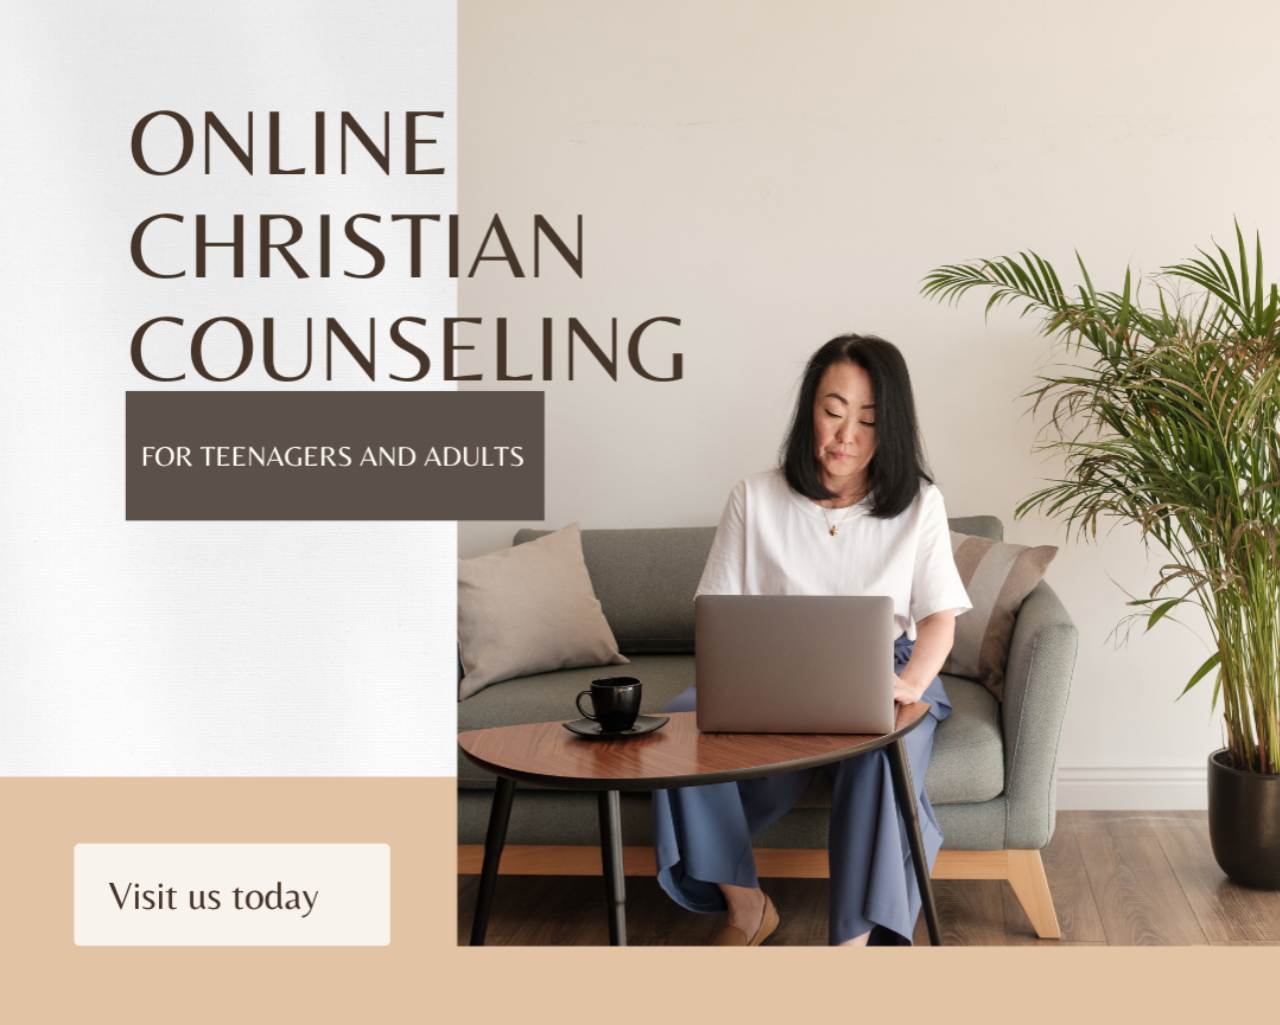 What is online Christian counseling